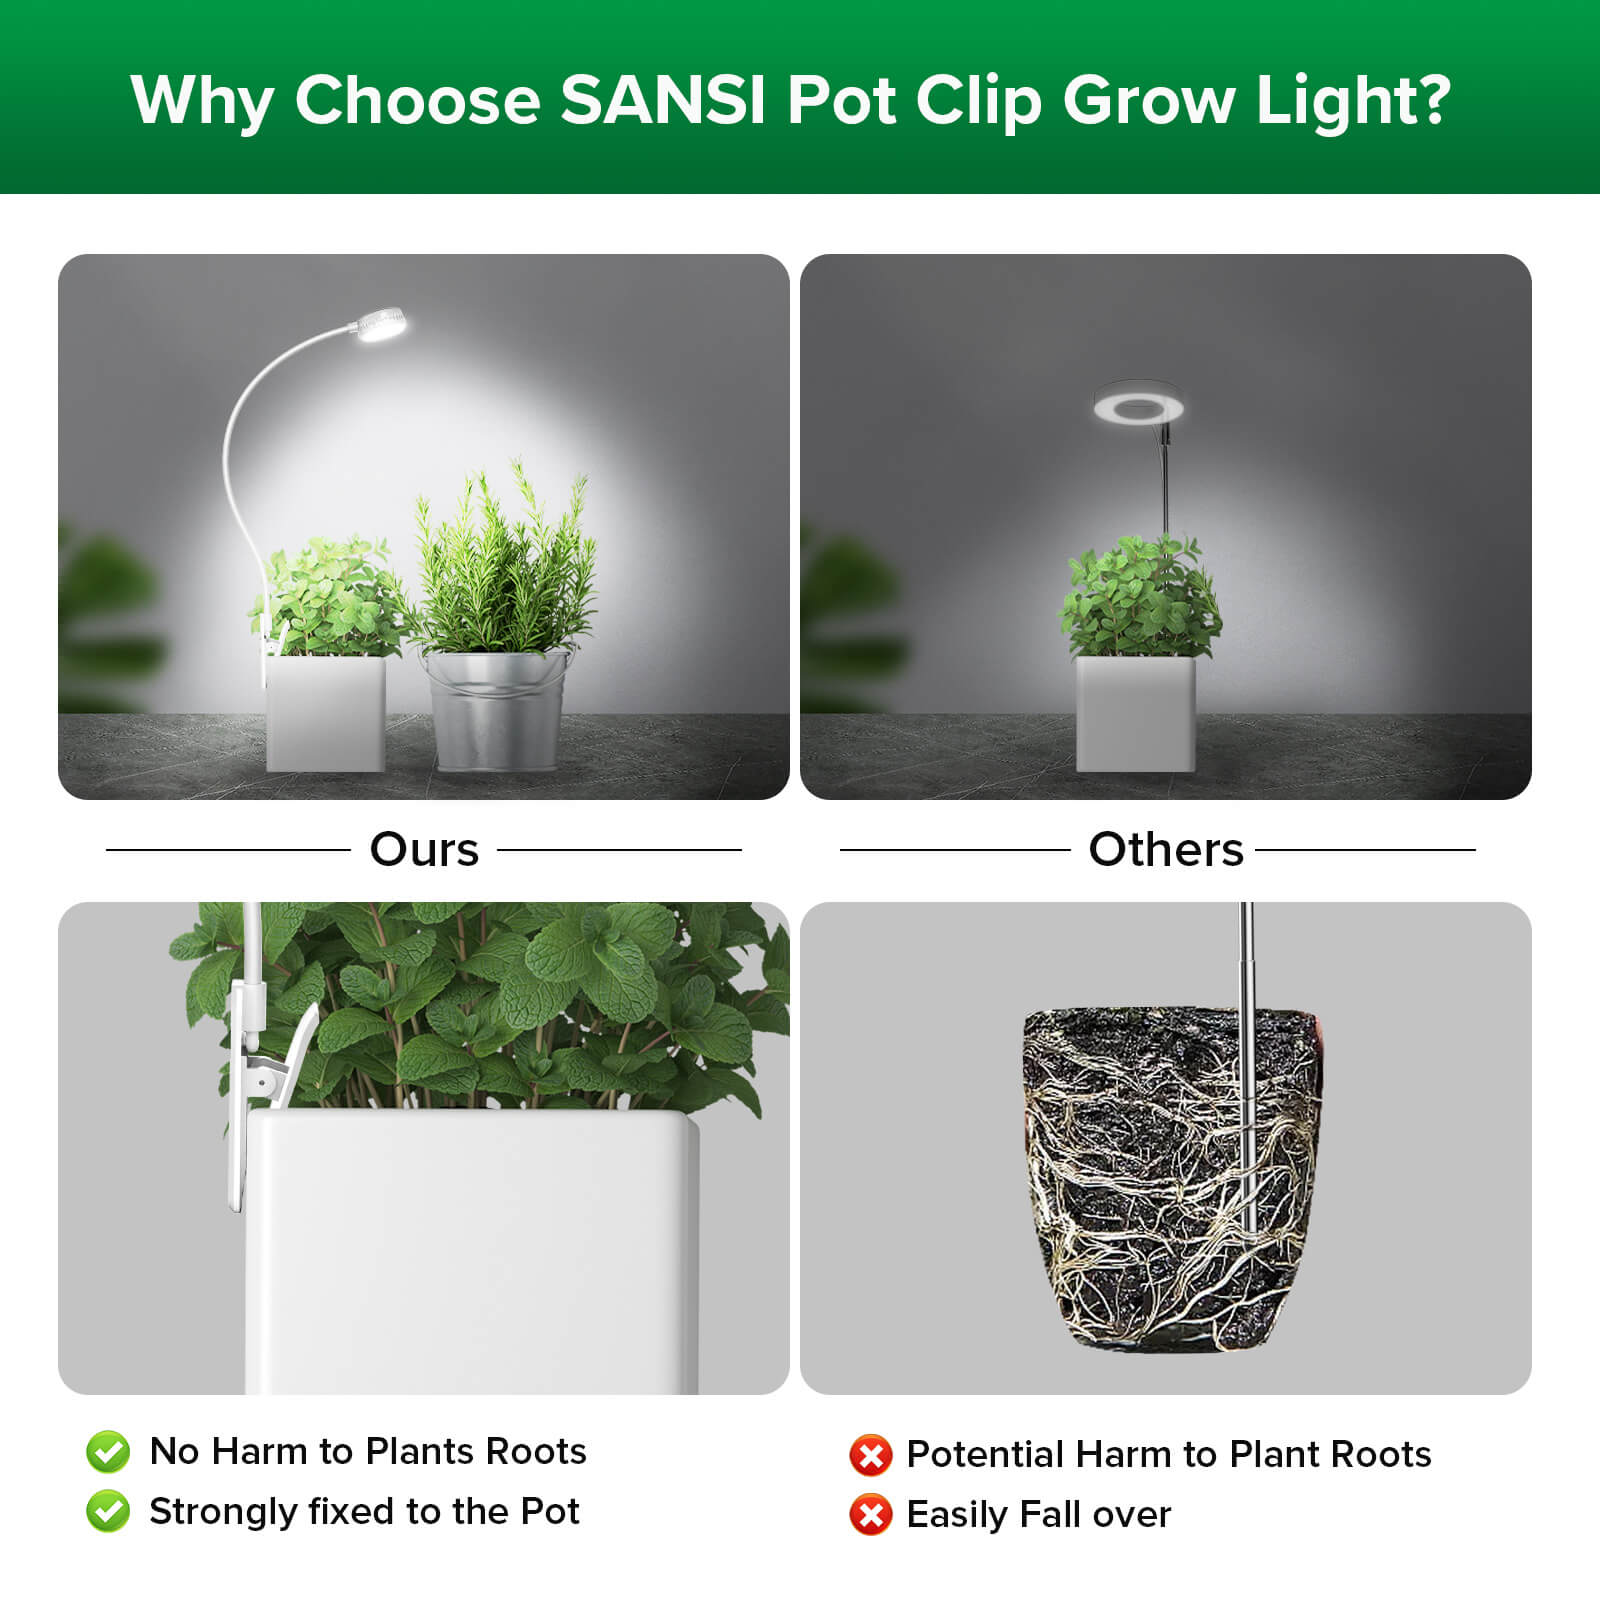 Pot Clip LED Grow Light, no harm to plants roots, strongly fixed to the pot